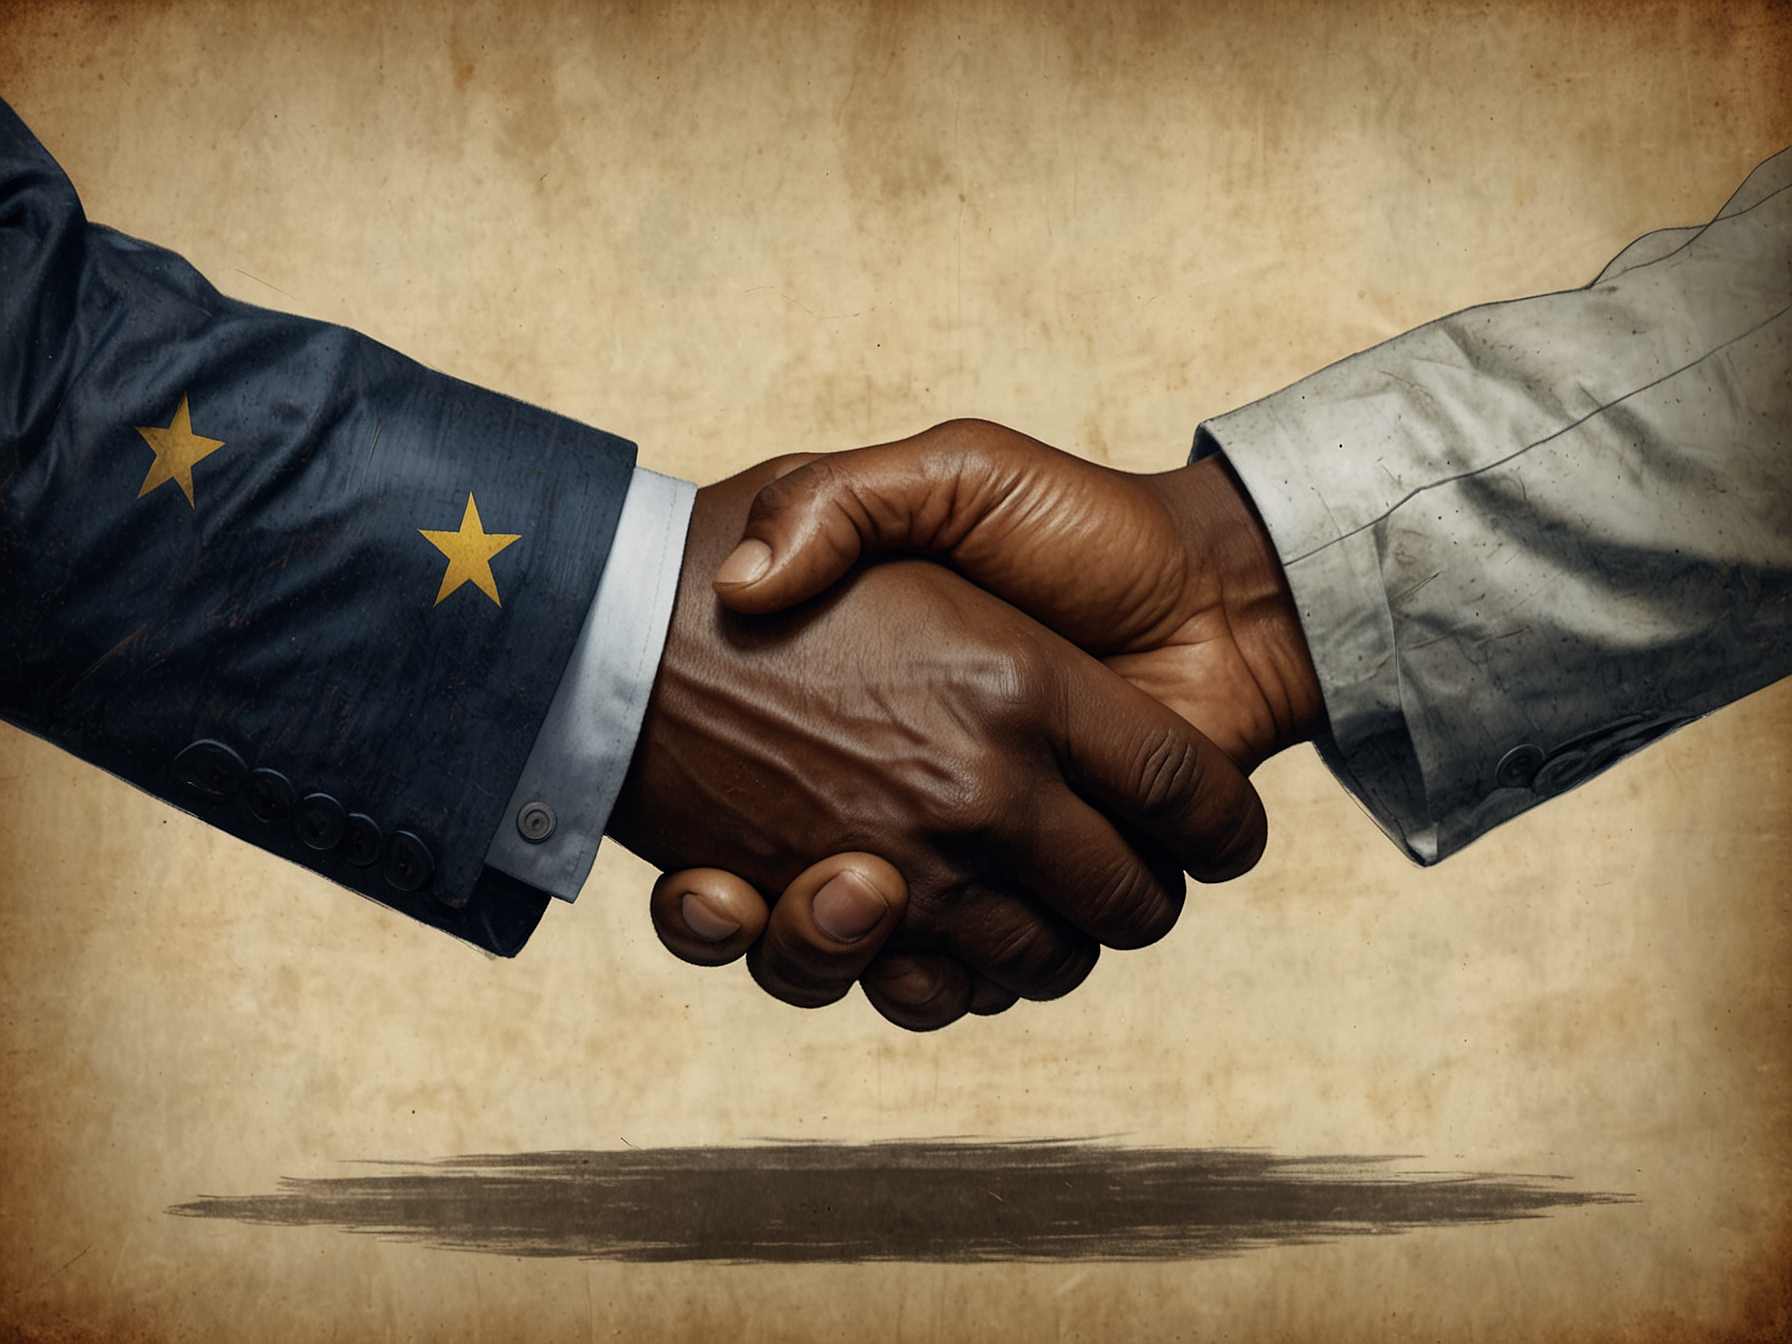 An image depicting a handshake between representatives of Sundance Resources and the Republic of Congo, symbolizing the amicable settlement of their prolonged legal dispute.